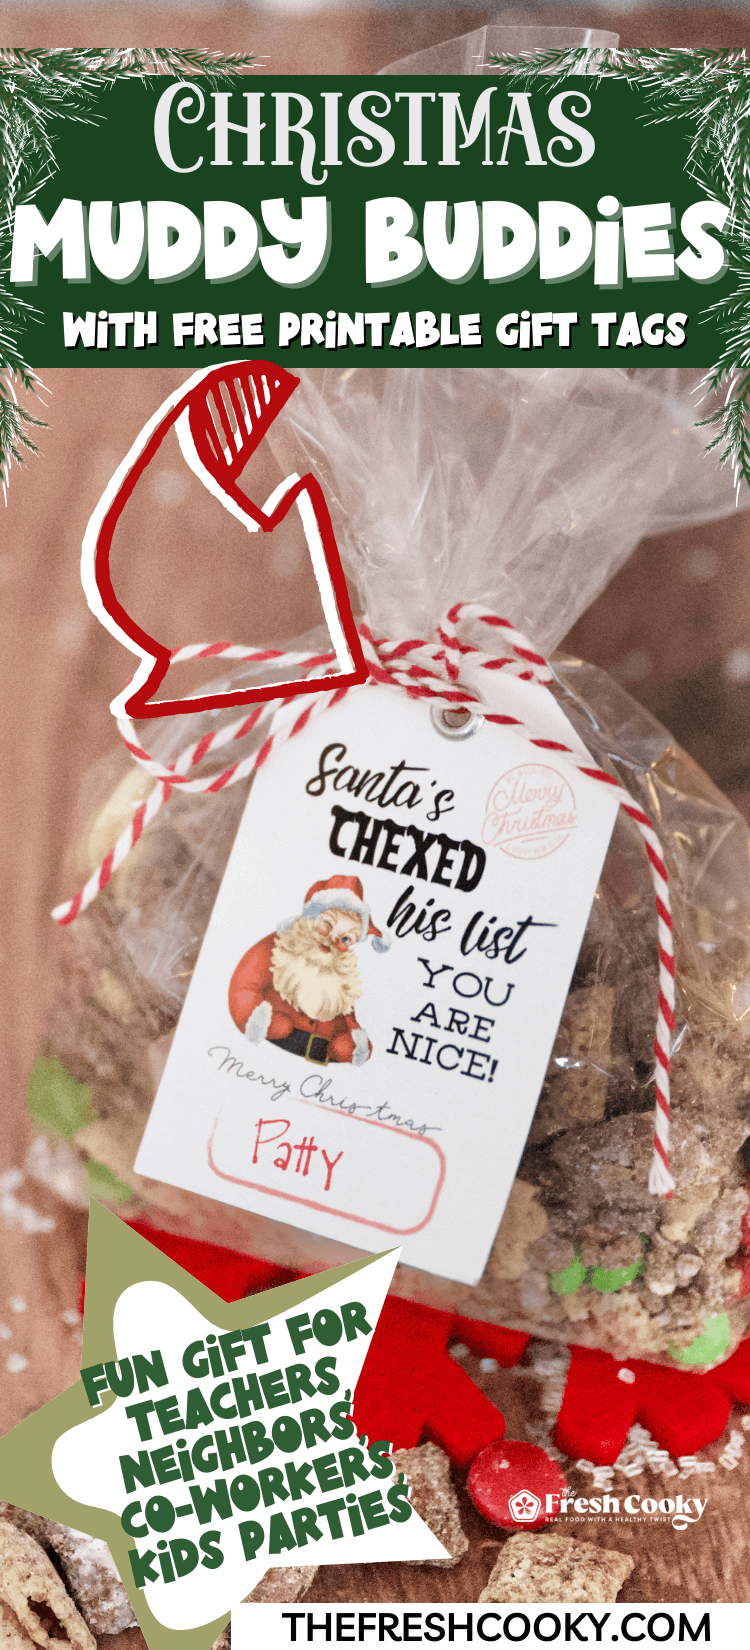 Christmas Muddy Buddies in cute package tired with twine and a festive free gift tag attached, for pinning.